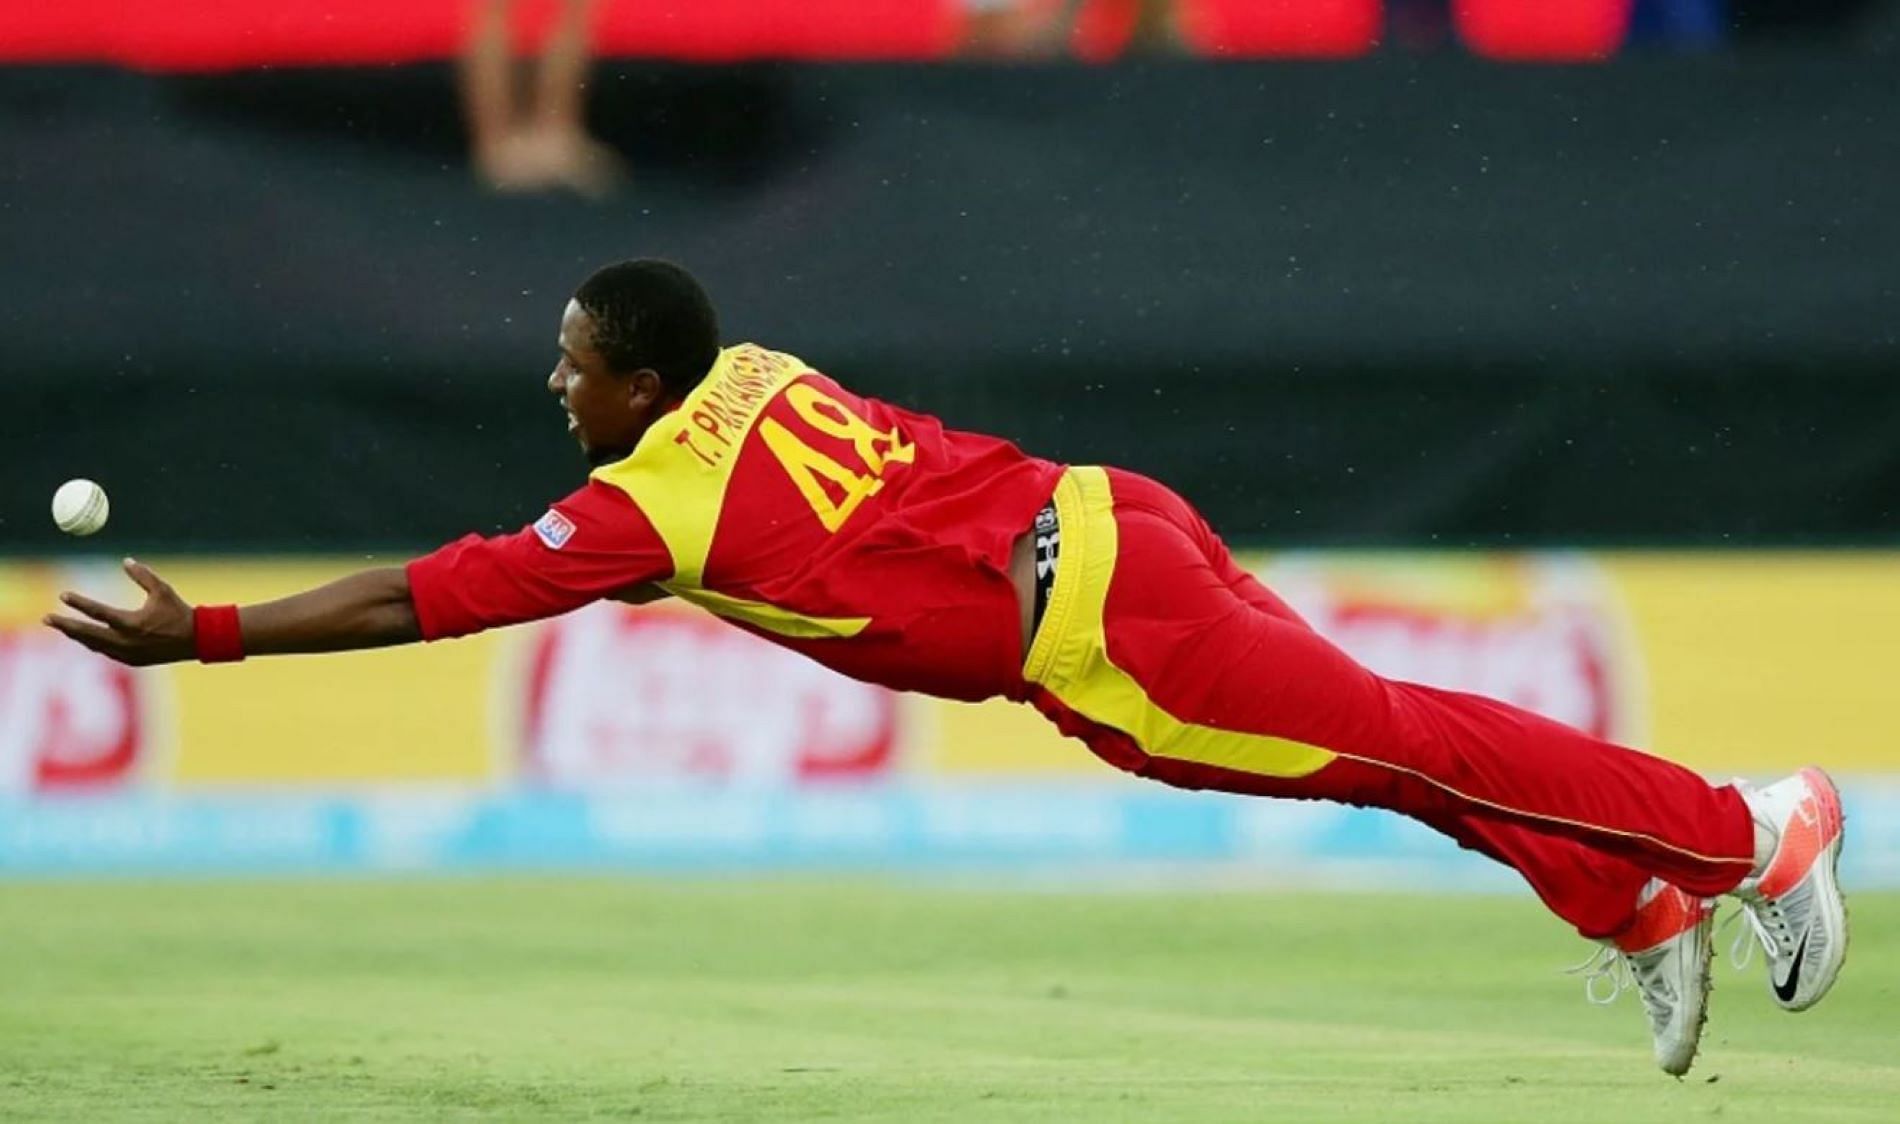 The Zimbabwe pacer was expensive throughout the 2015 World Cup.